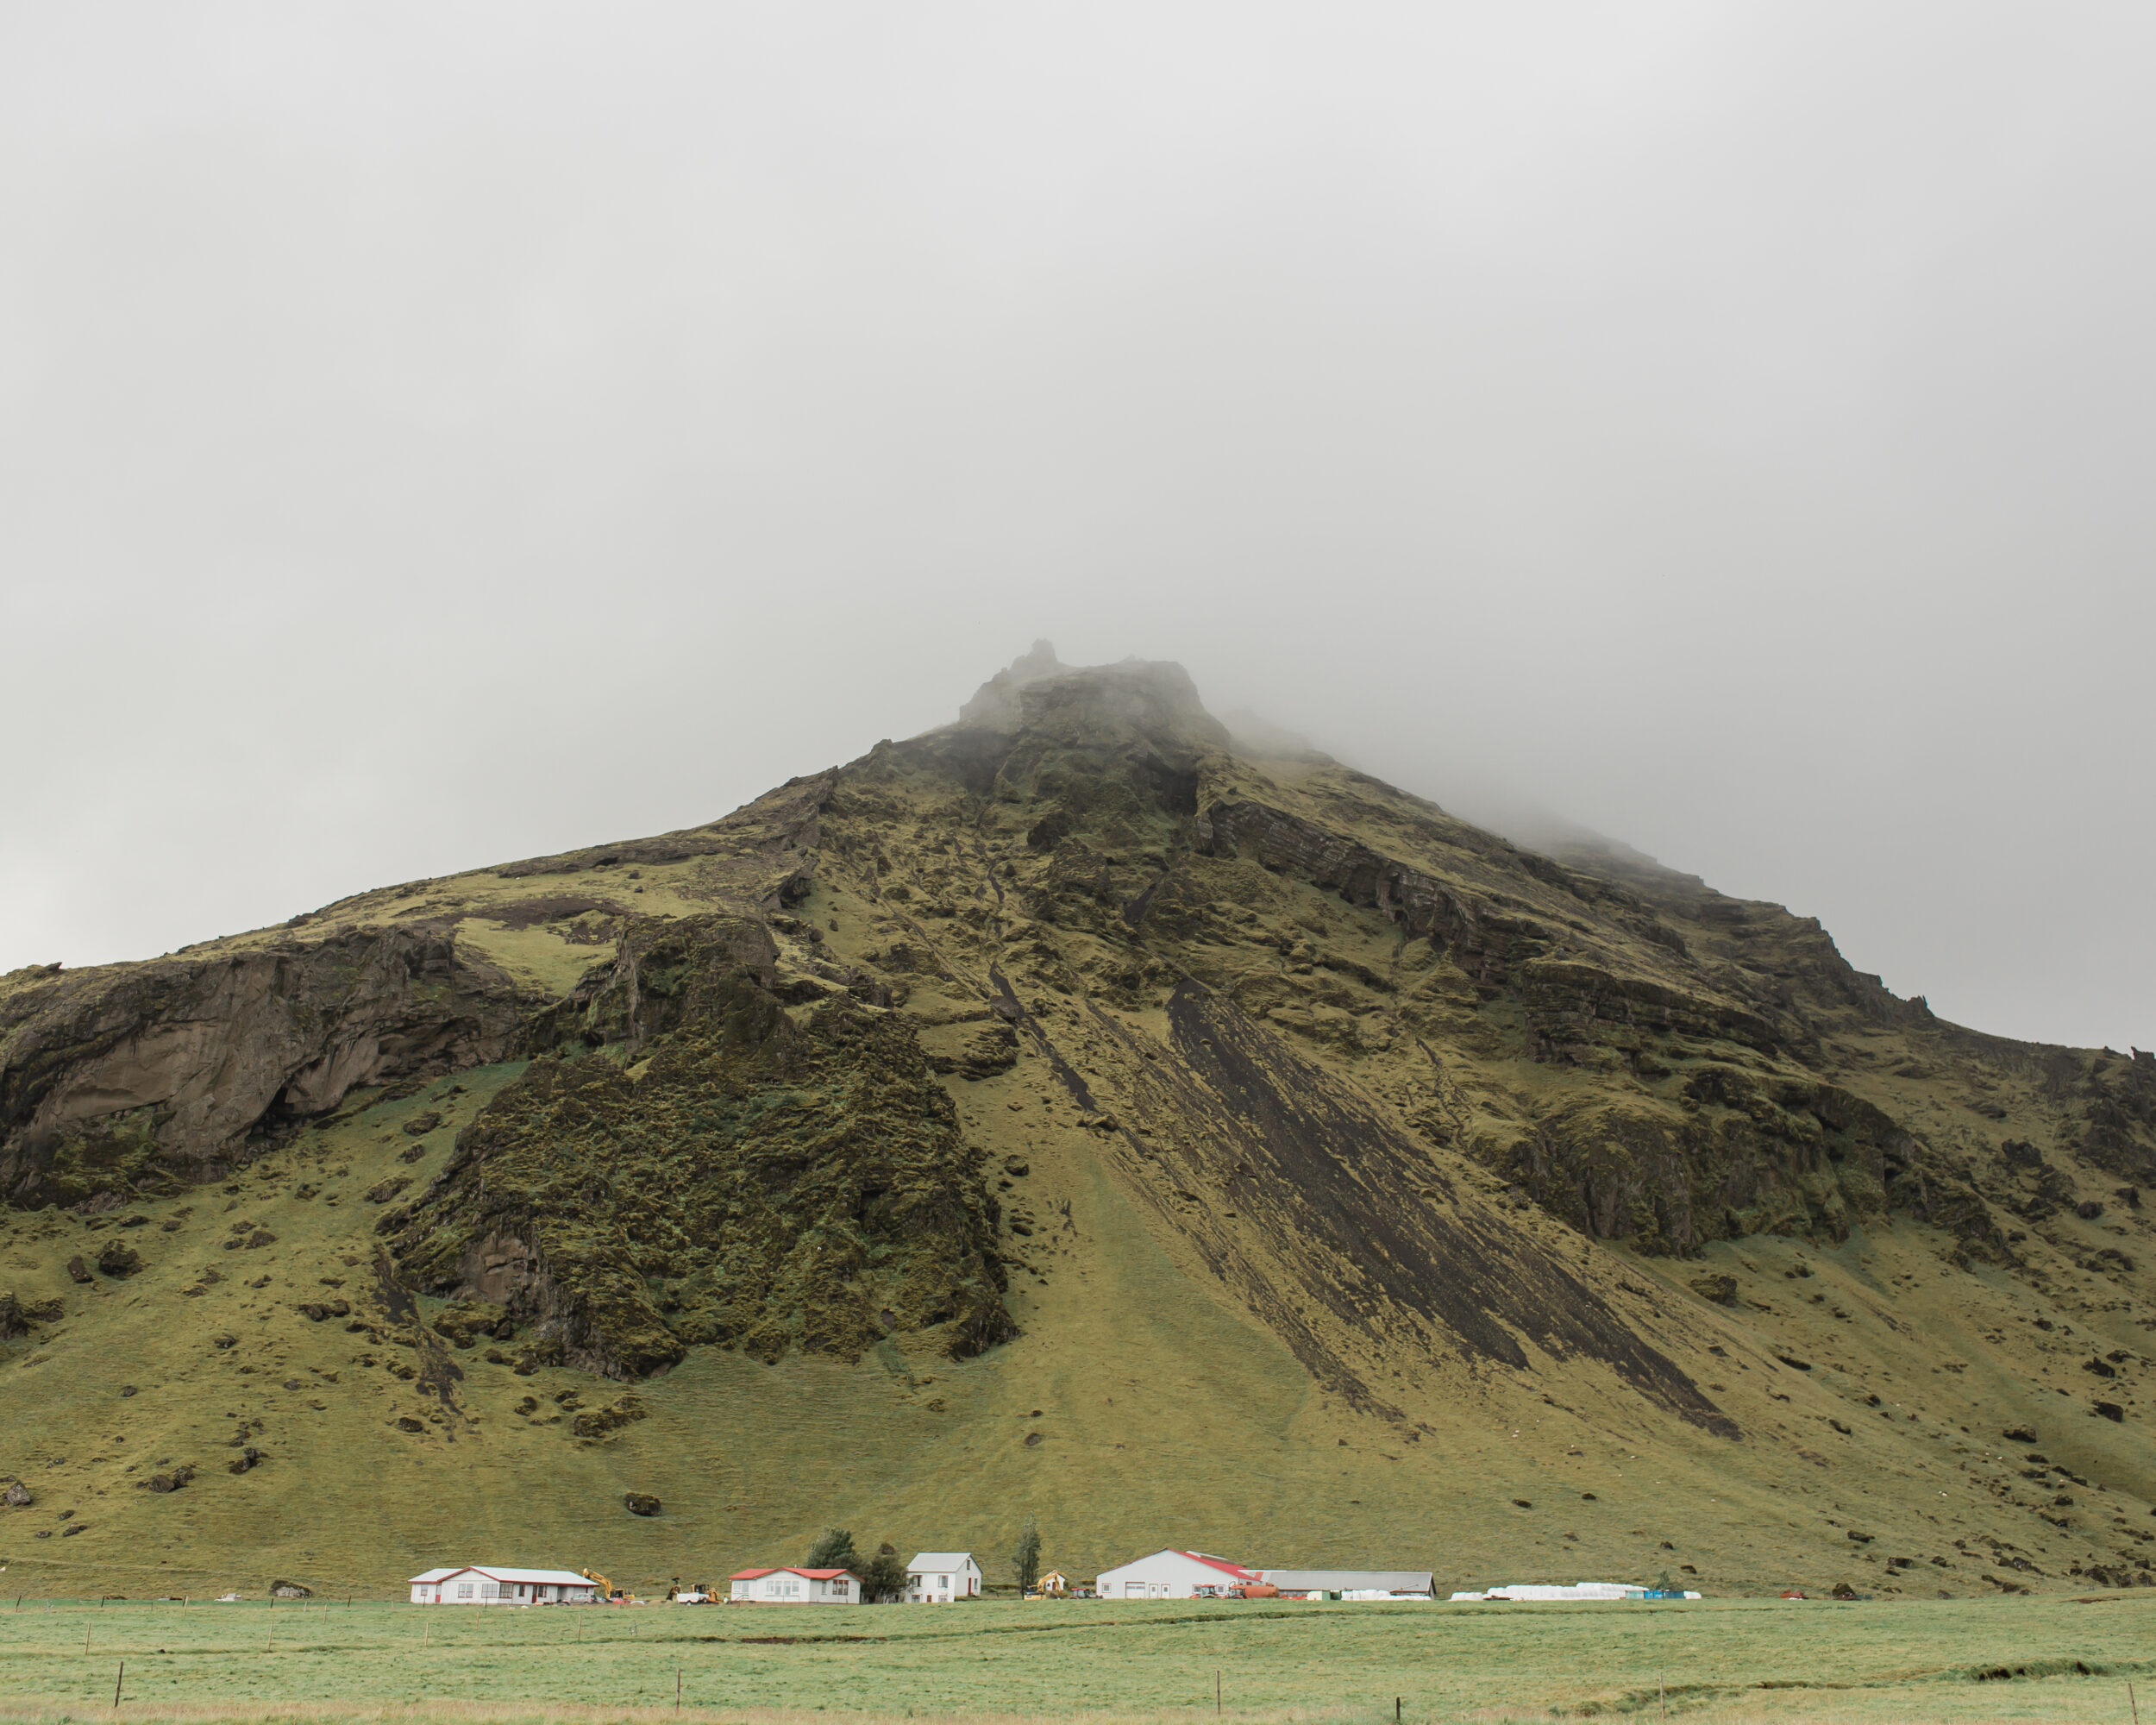 A foggy Icelandic mountain peak towers over a small town.